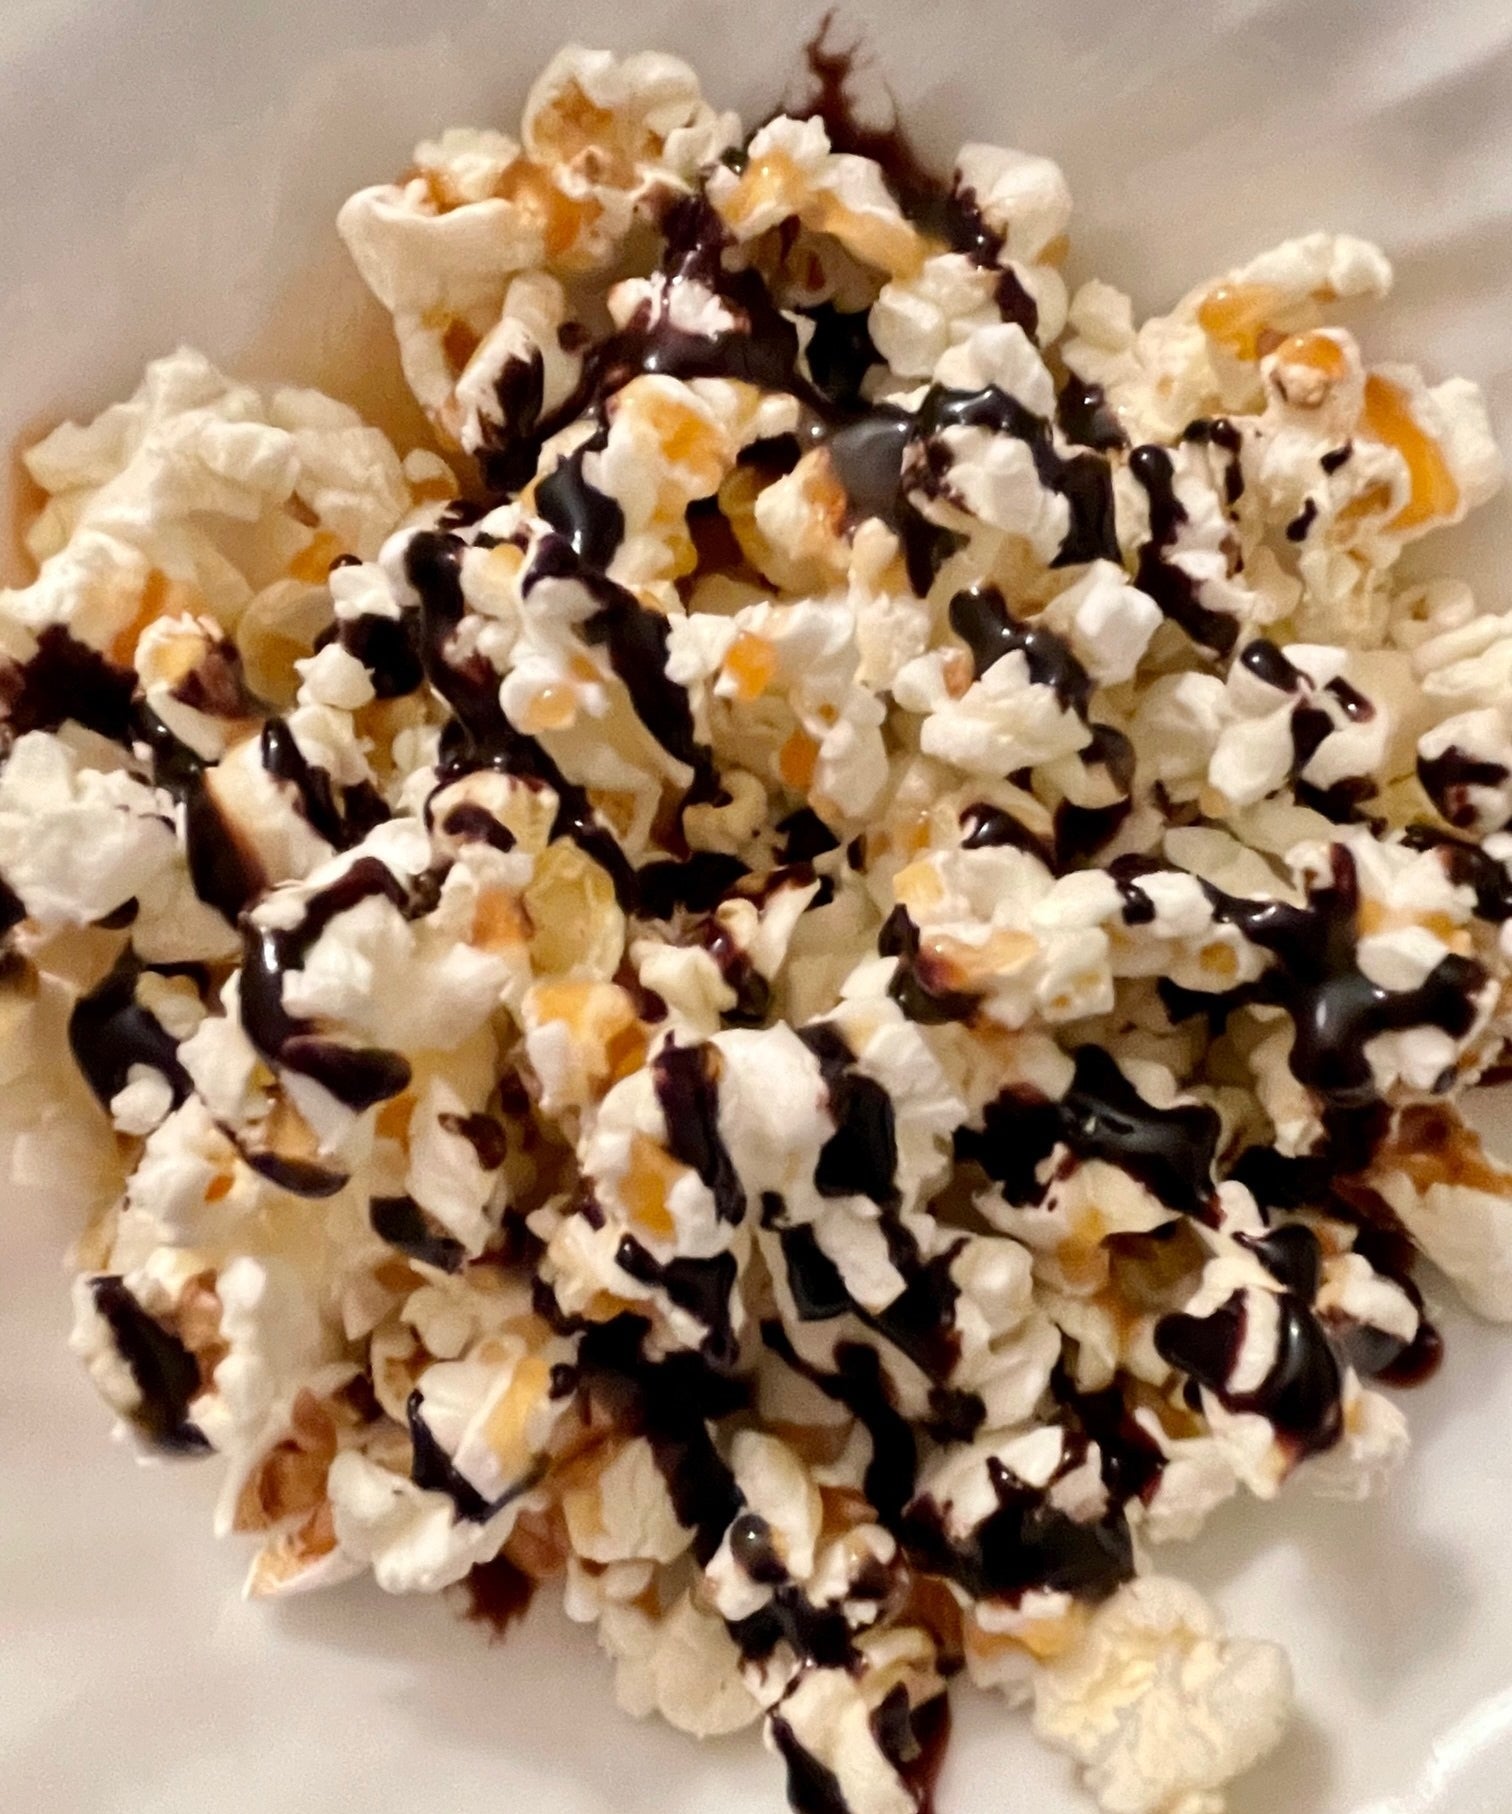 Popcorn with chocolate and caramel syrup